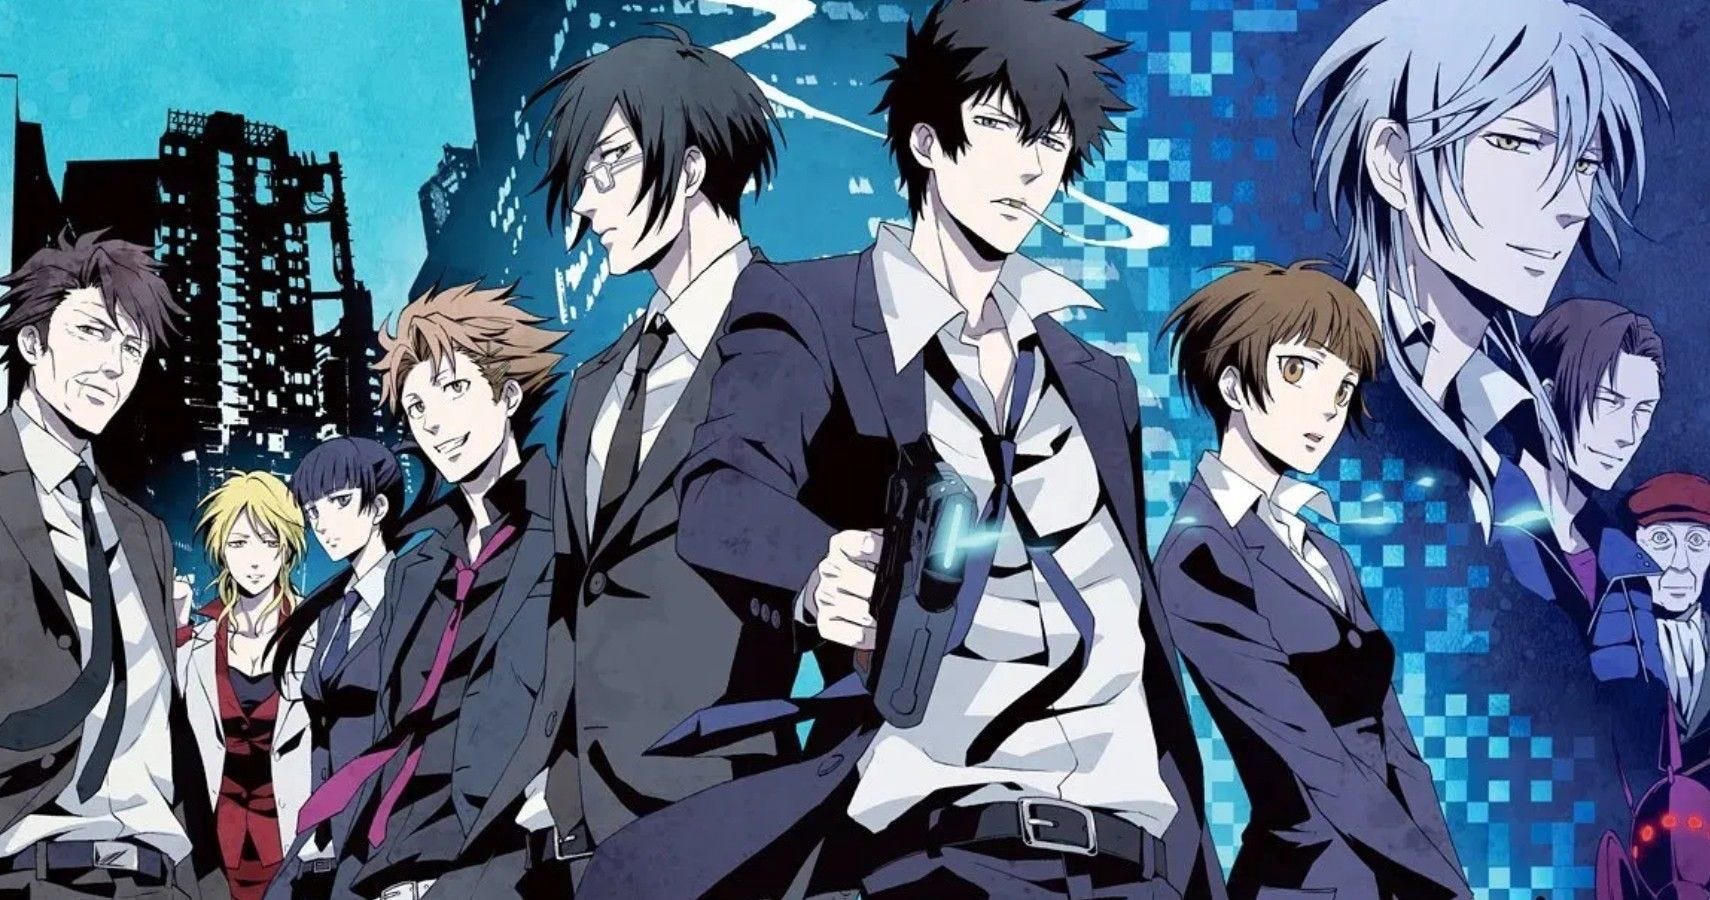 Where to Watch 'Psycho-Pass Season 1' Your Complete Guide to Streaming on Hulu and Crunchyroll